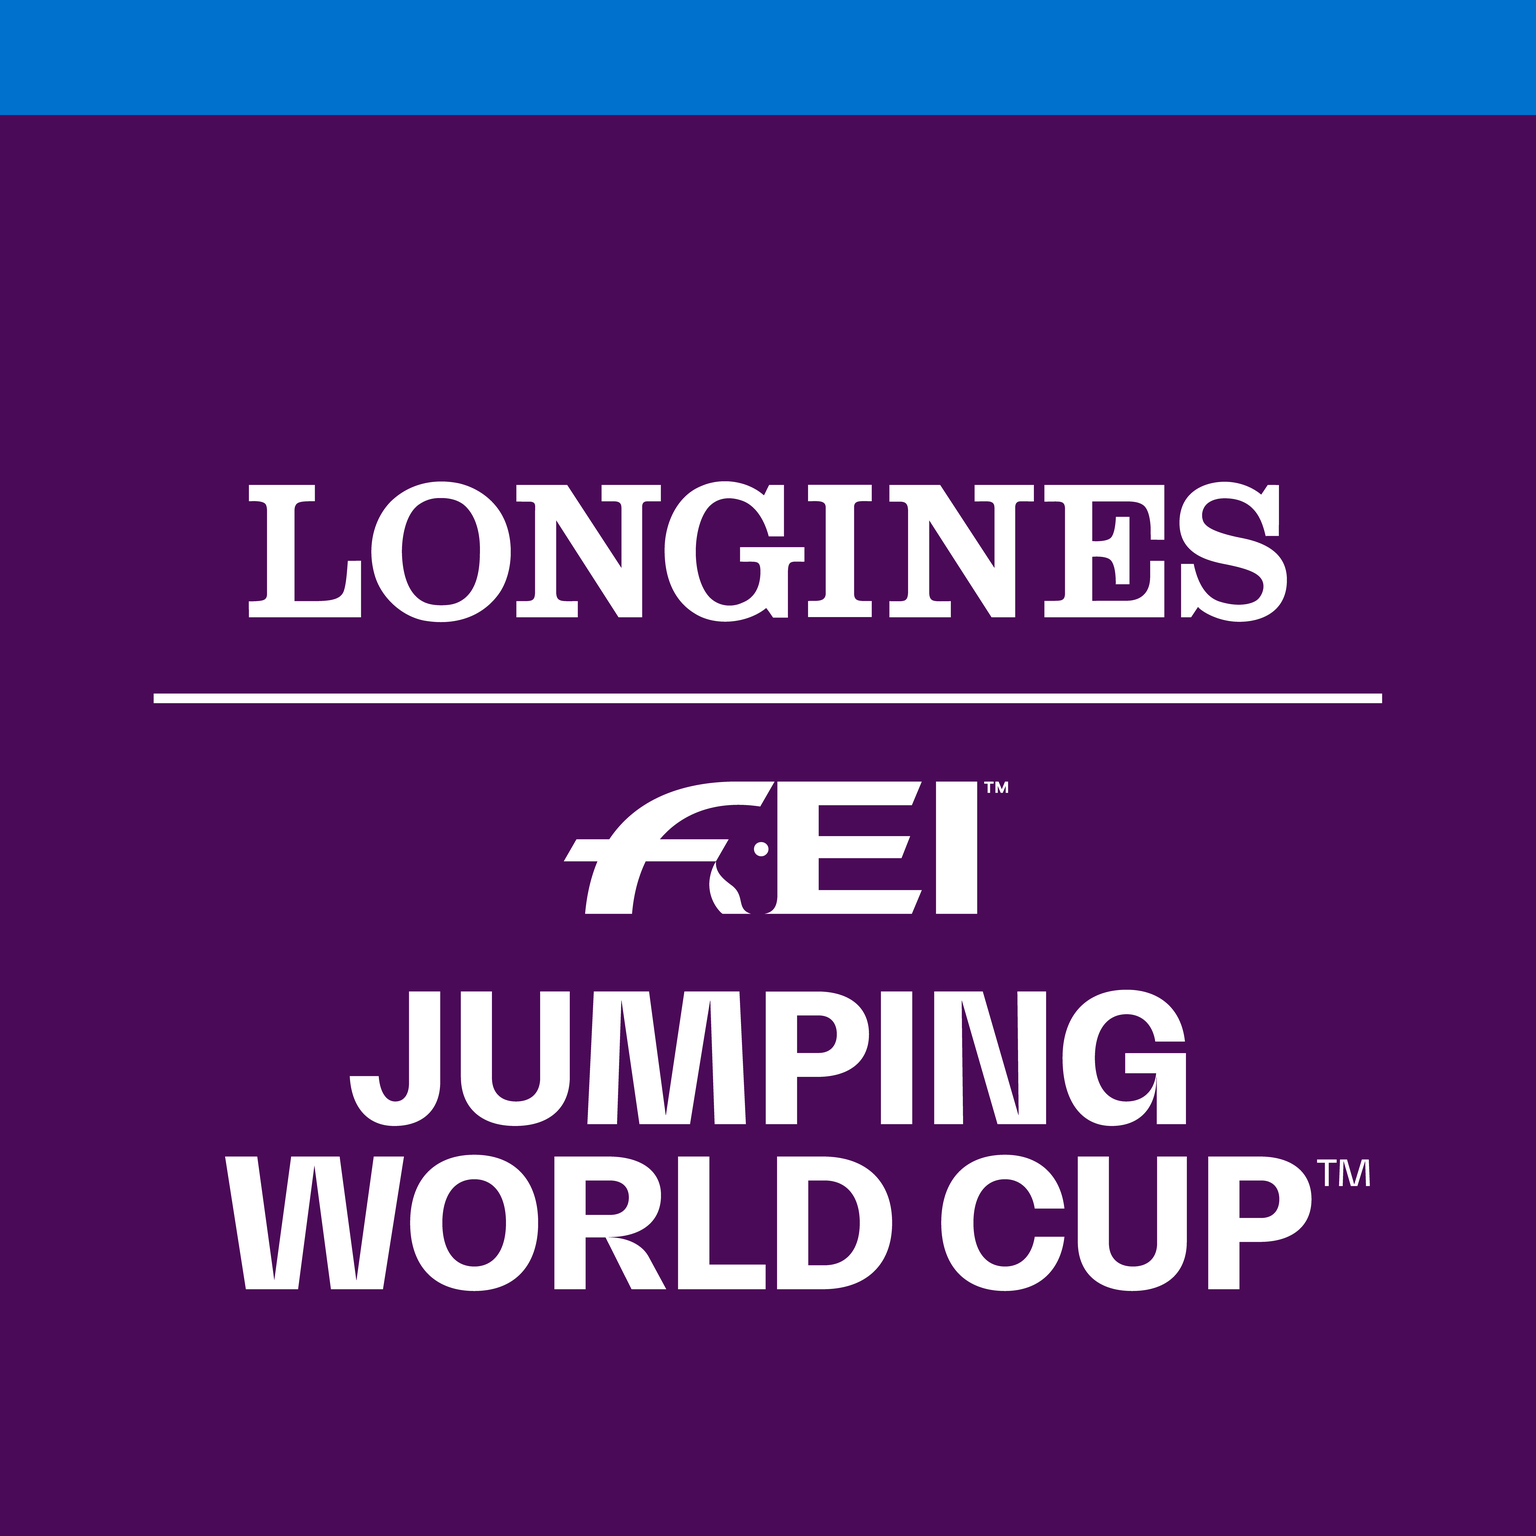 Longines FEI Jumping World Cup Finals - Soundcheck Grand Prix [CANCELLED] at CHI Health Center